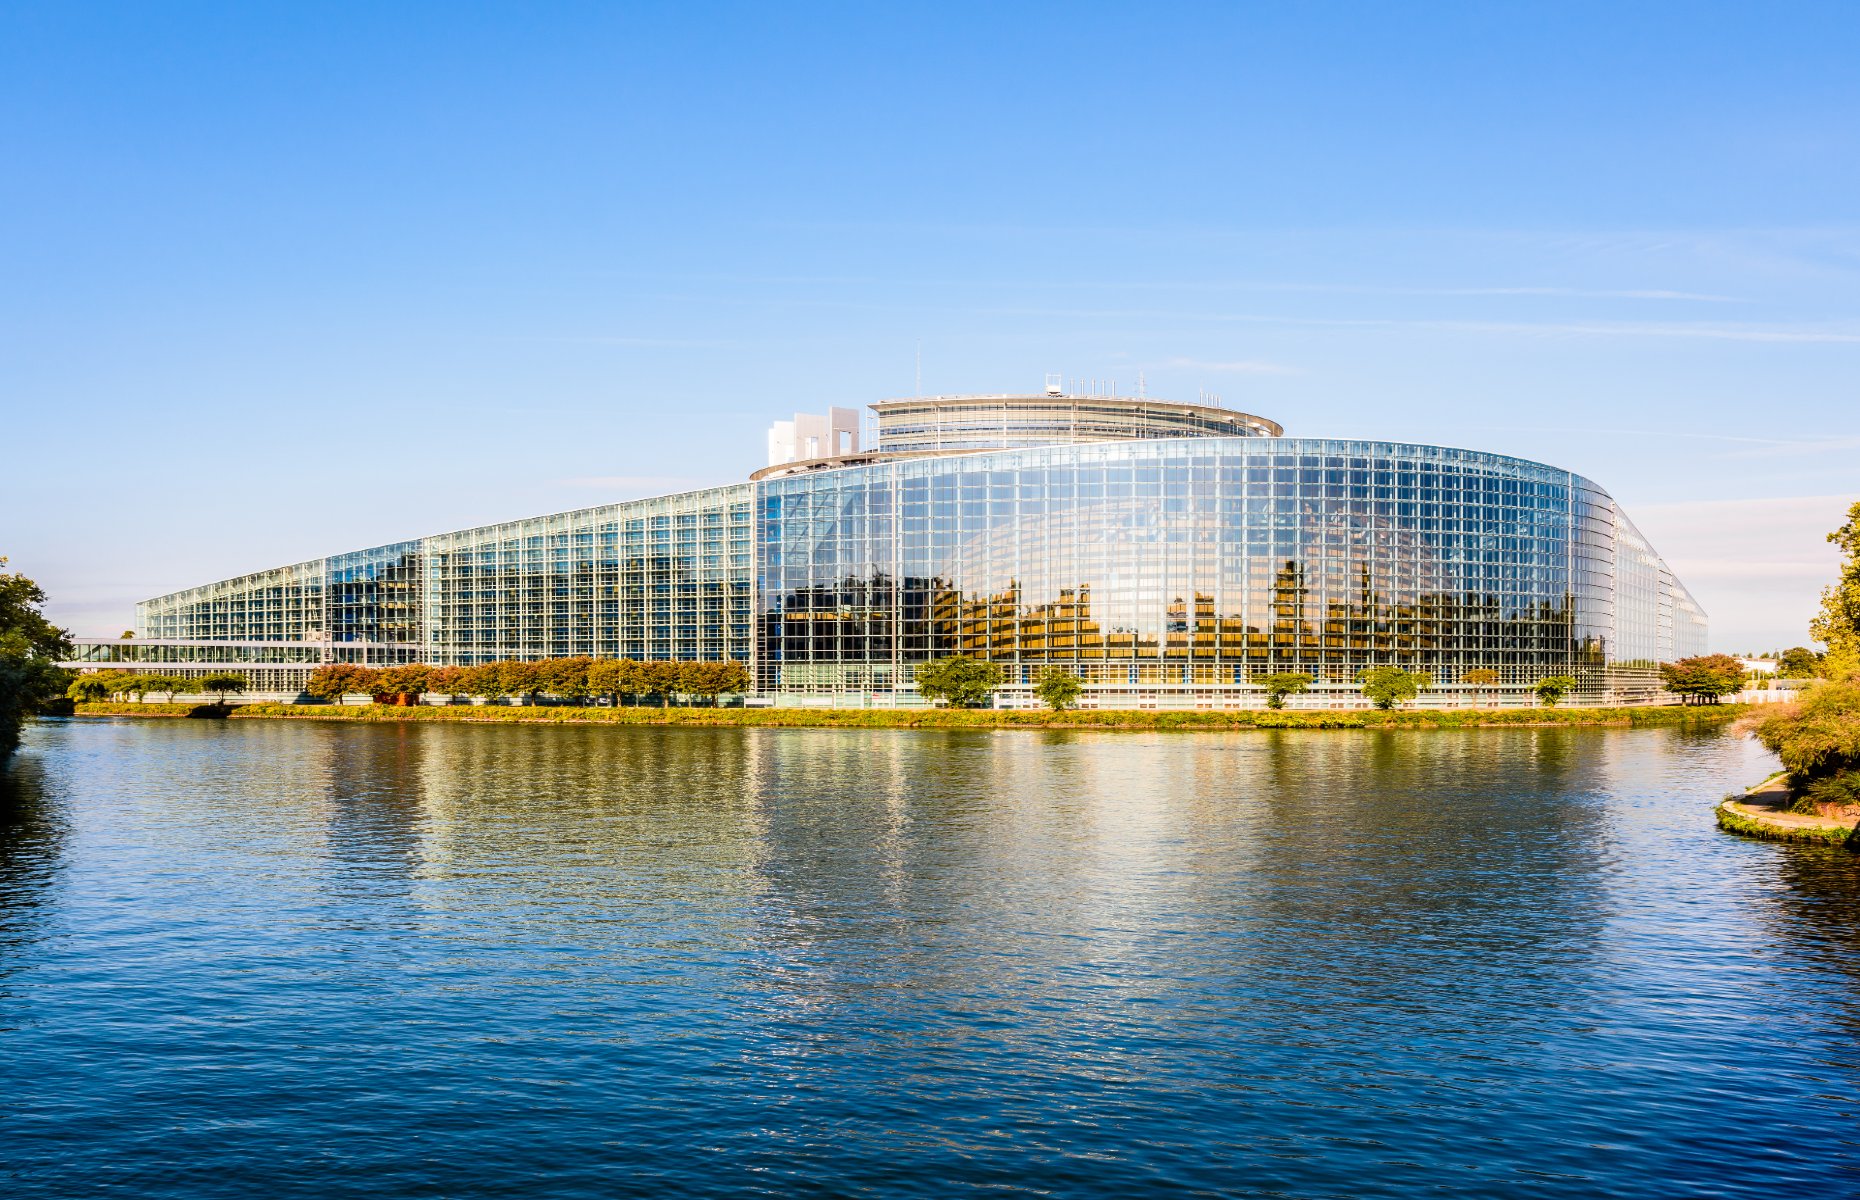 Eu building from the river (Image: olrat/Shutterstock)